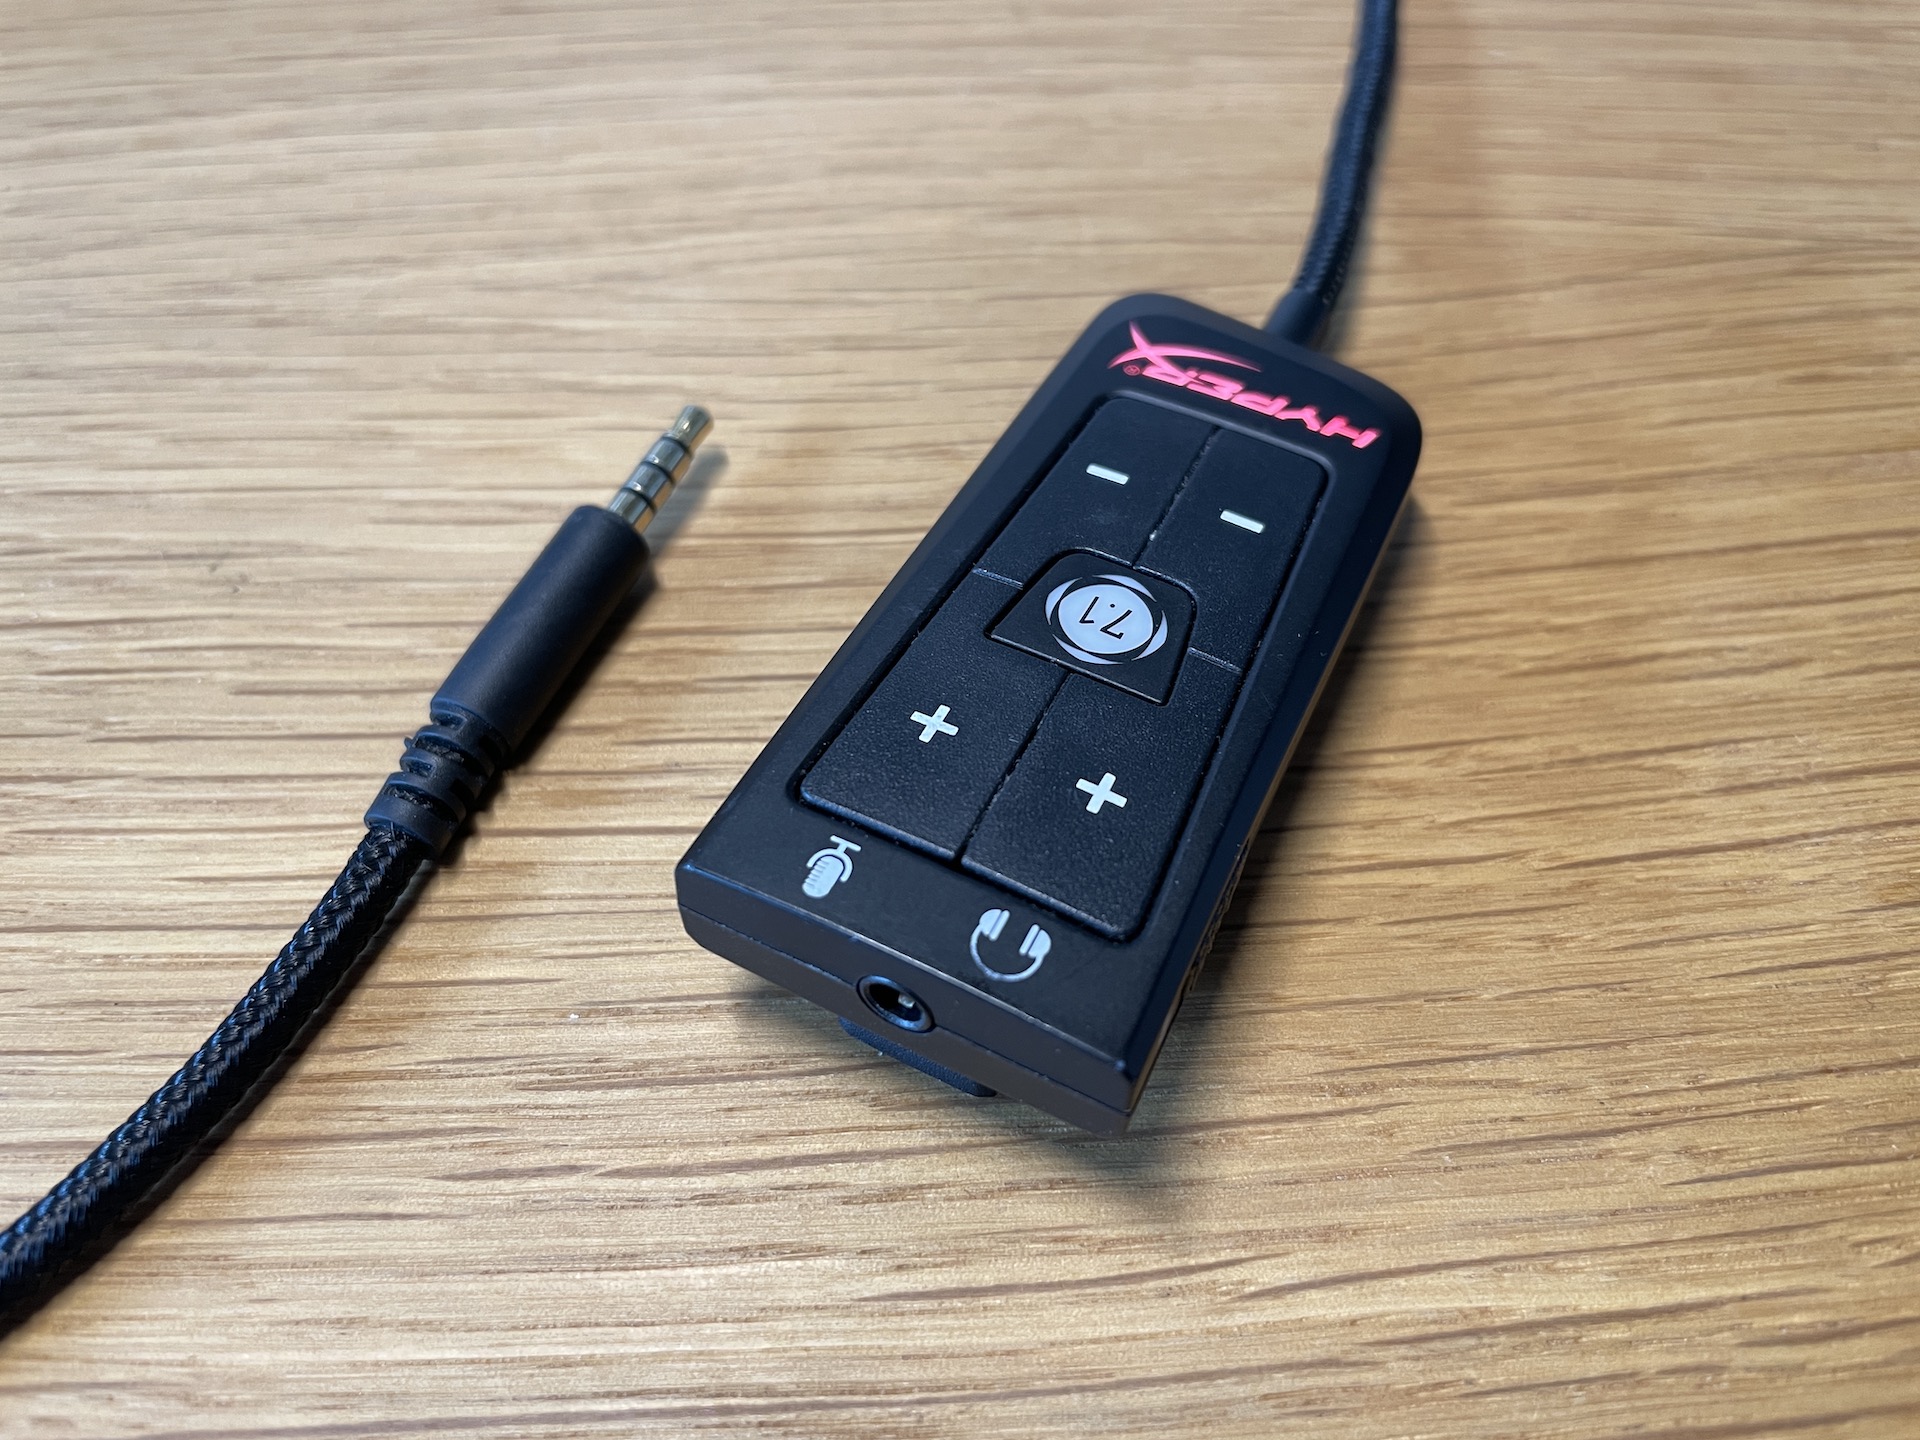 USB sound card that comes with Cloud II headphones